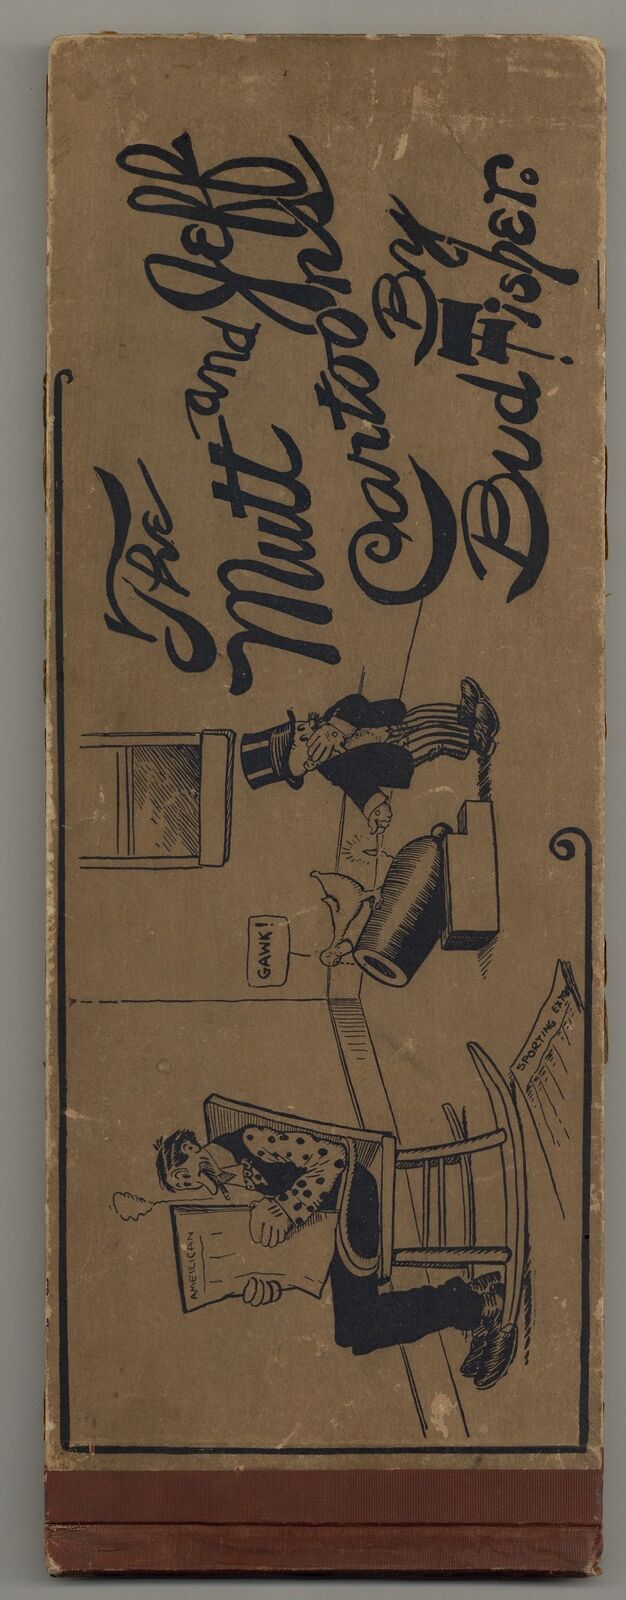 Mutt and Jeff #1 VG- 3.5 1910